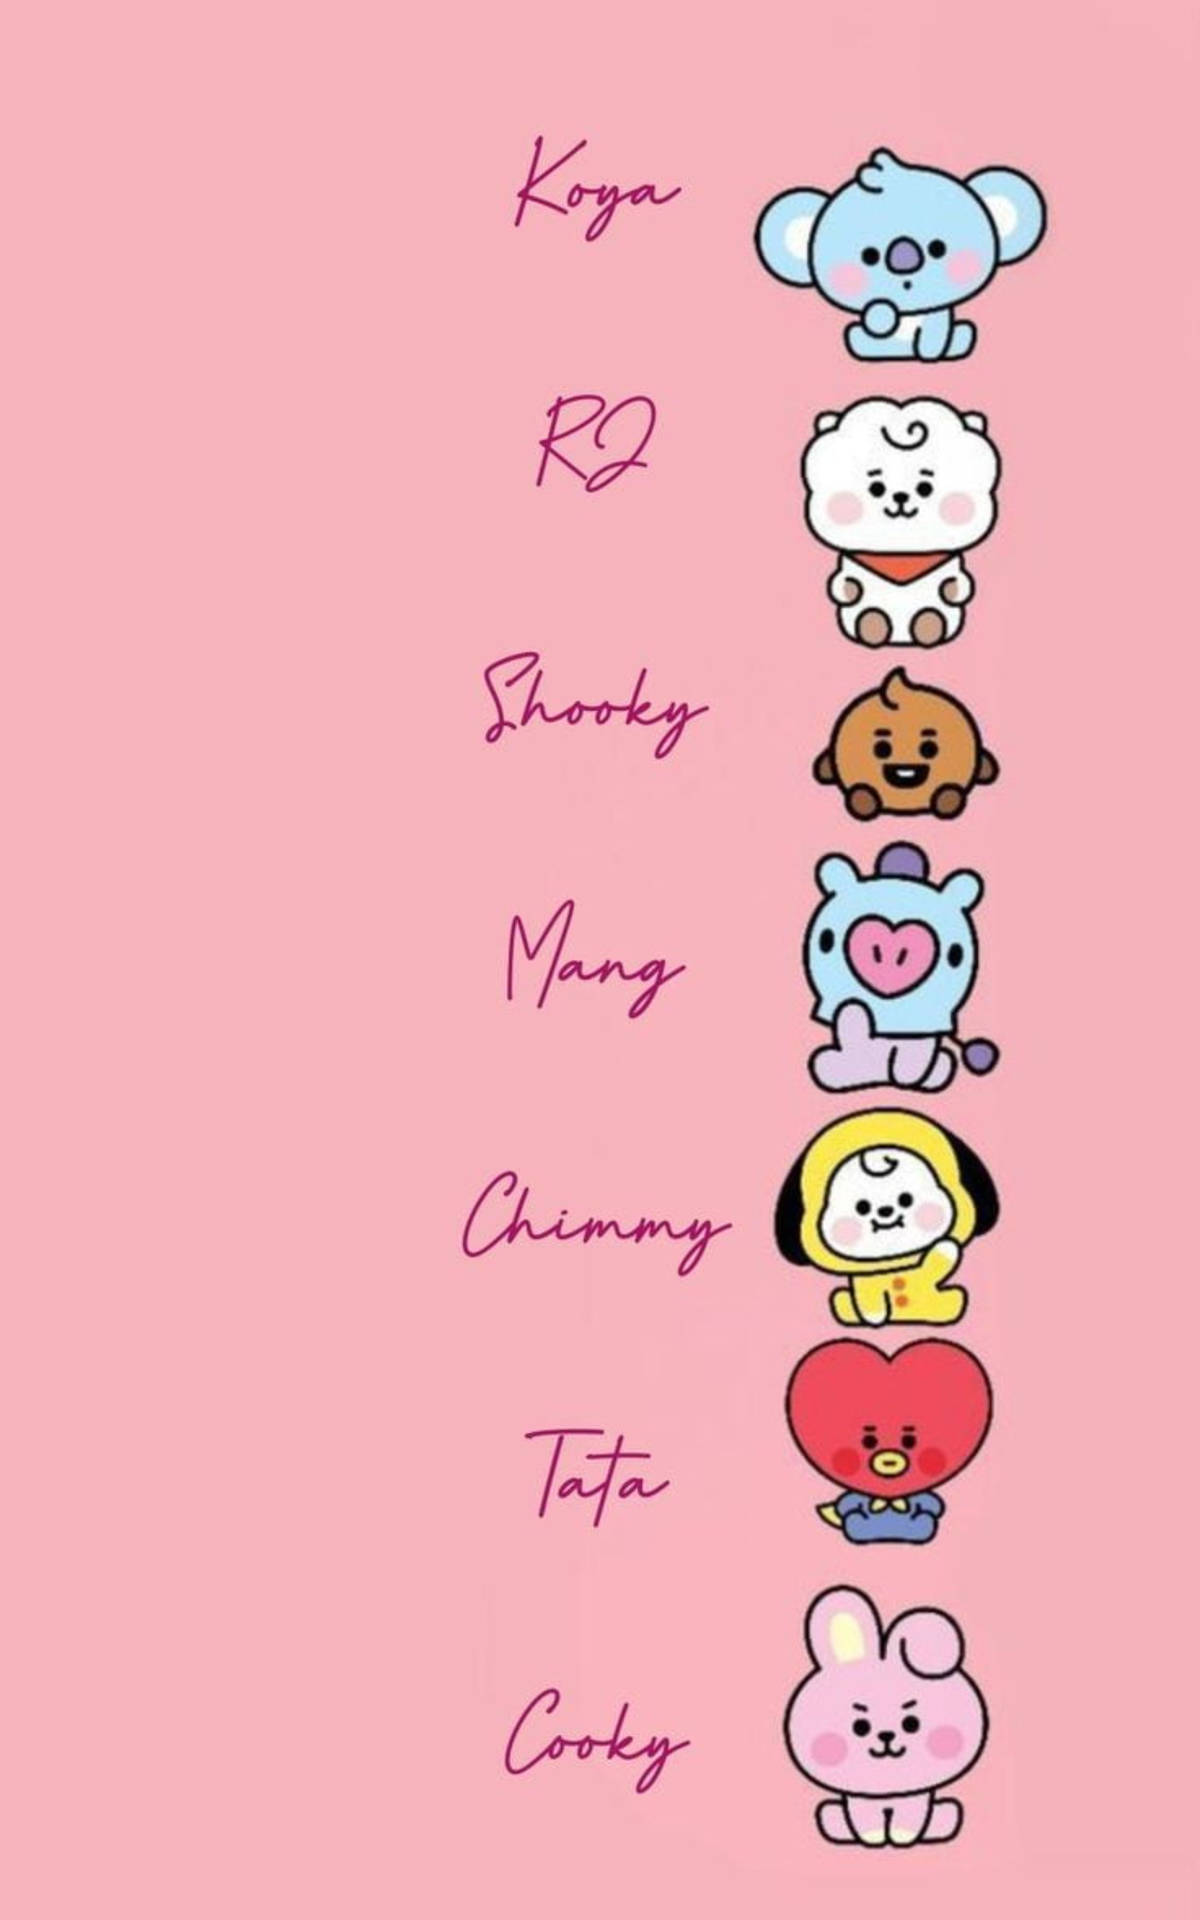 Bts Name Wallpapers